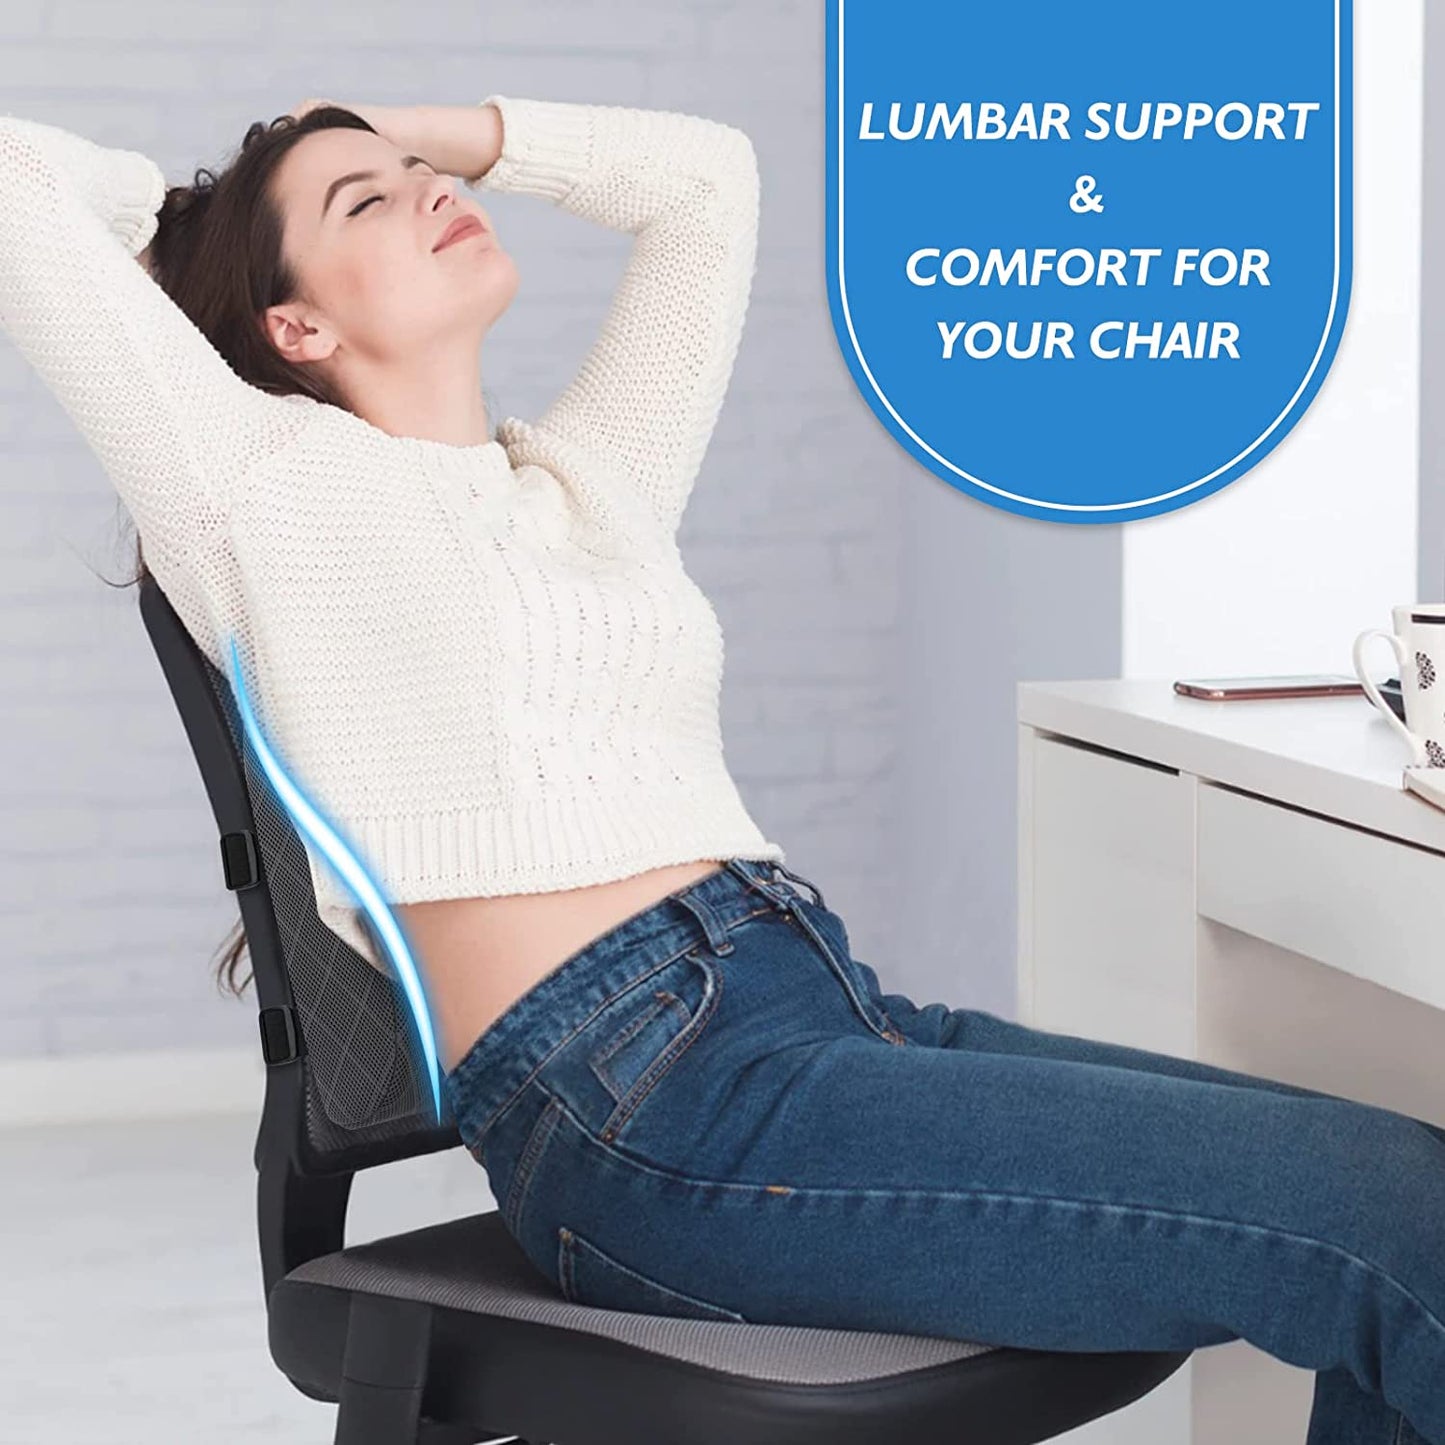 Lumbar Support Pillow for Back Support